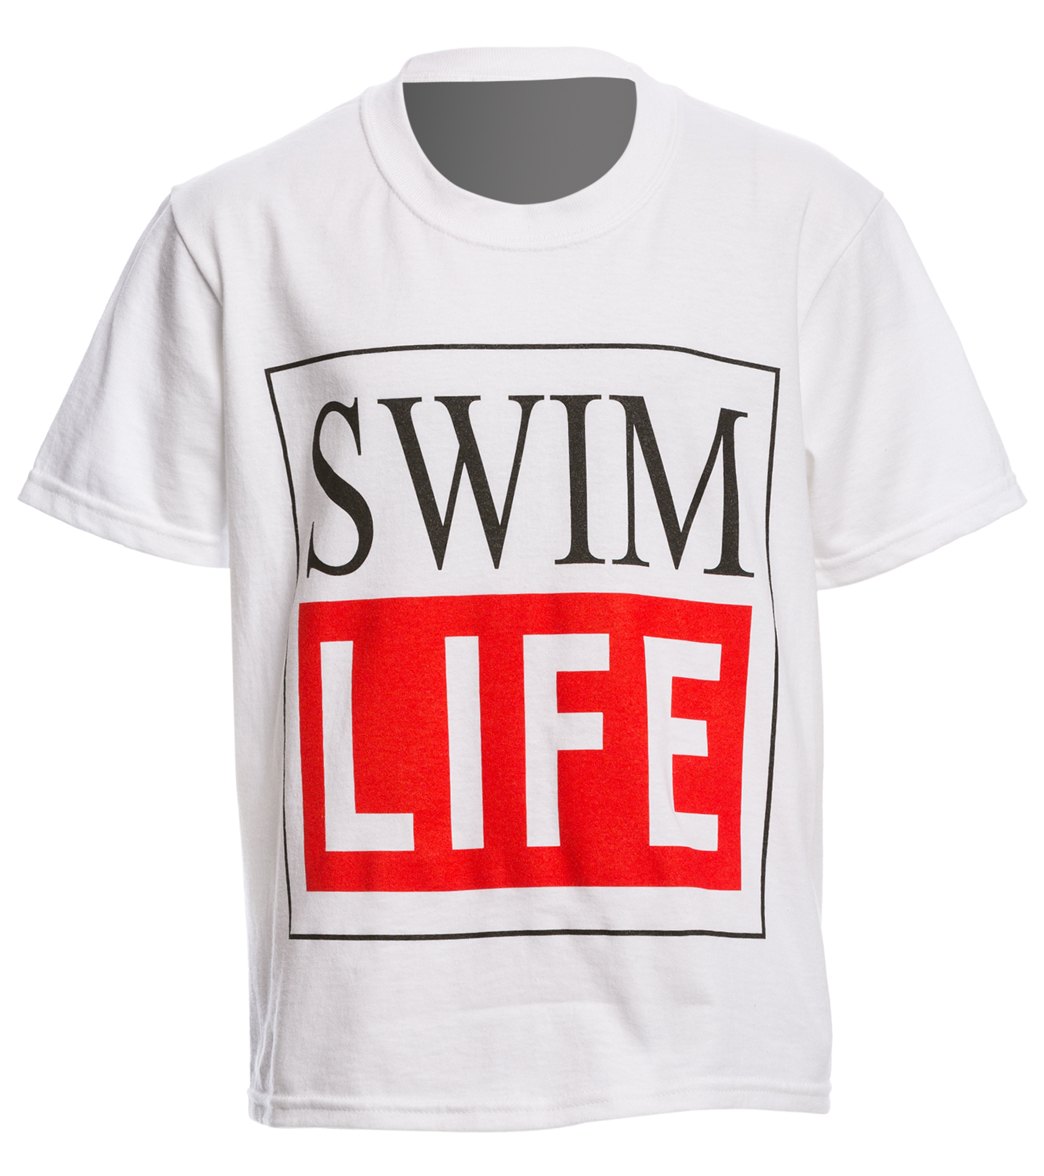 Ambro Manufacturing Youth Men's Short Sleeve Swim Life Tee Shirt - White Small Cotton - Swimoutlet.com